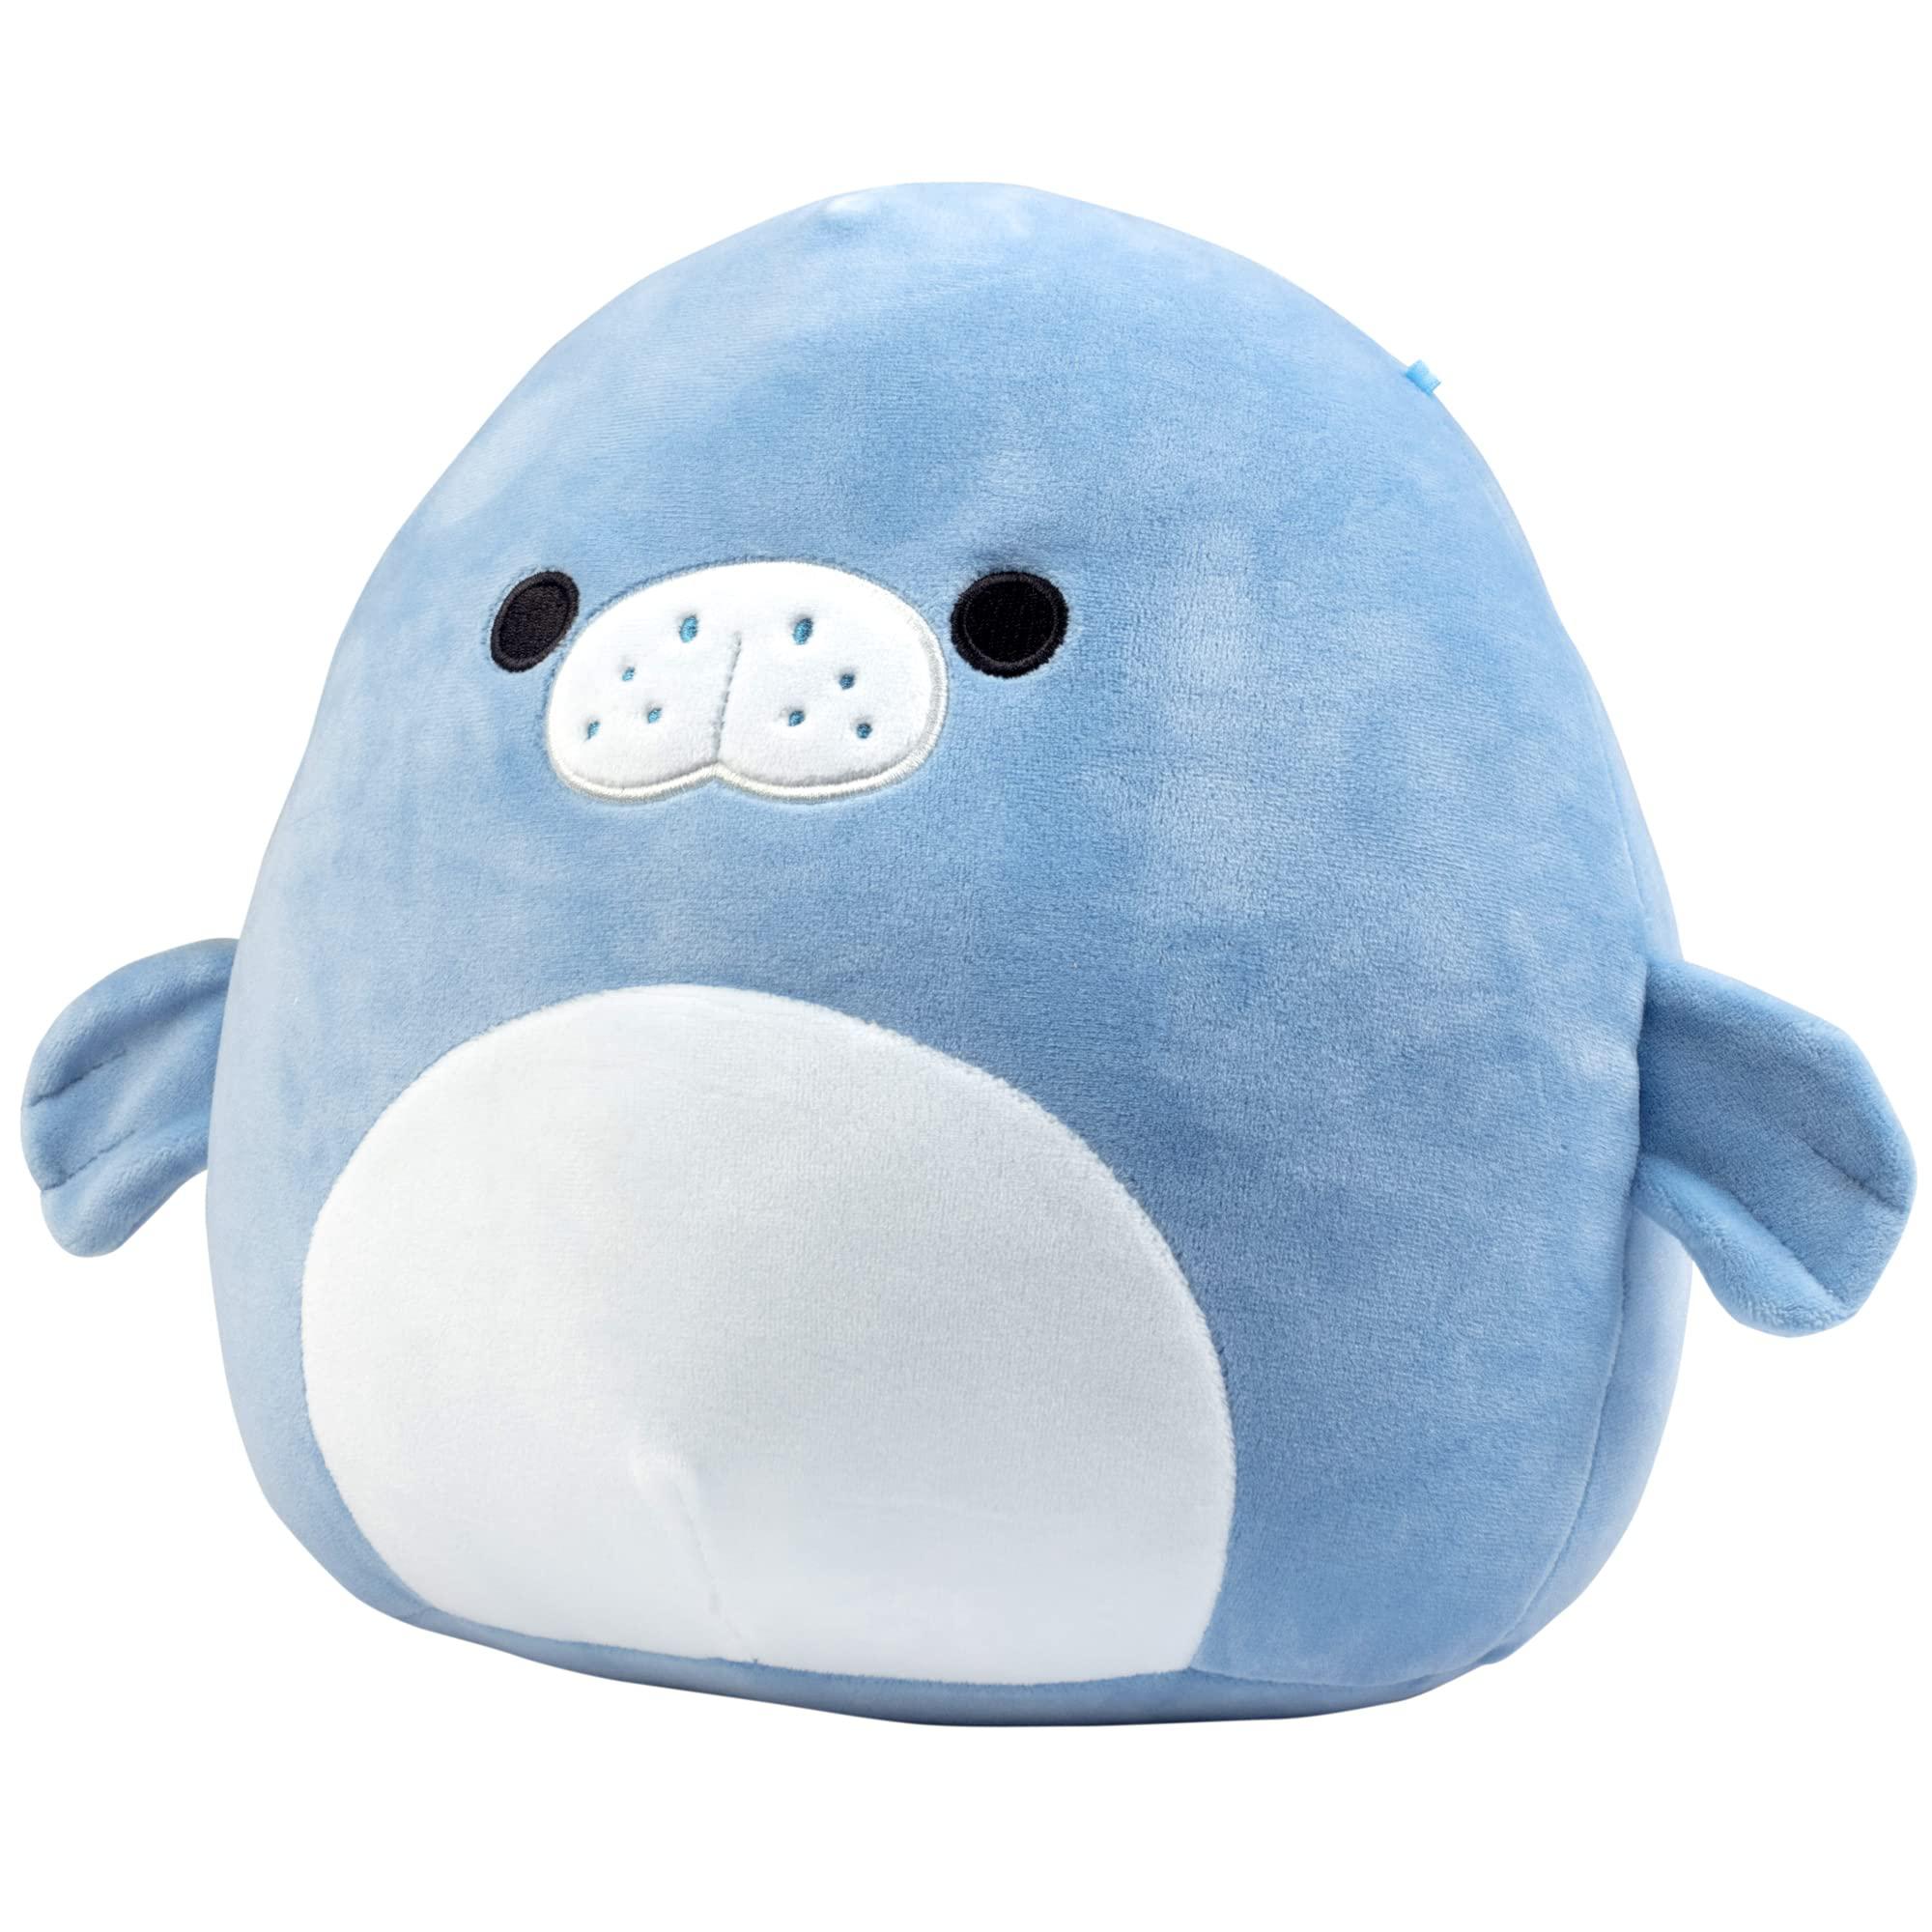 squishmallows 8" maeve the manatee - officially licensed kellytoy plush - collectible soft & squishy sea cow stuffed animal t